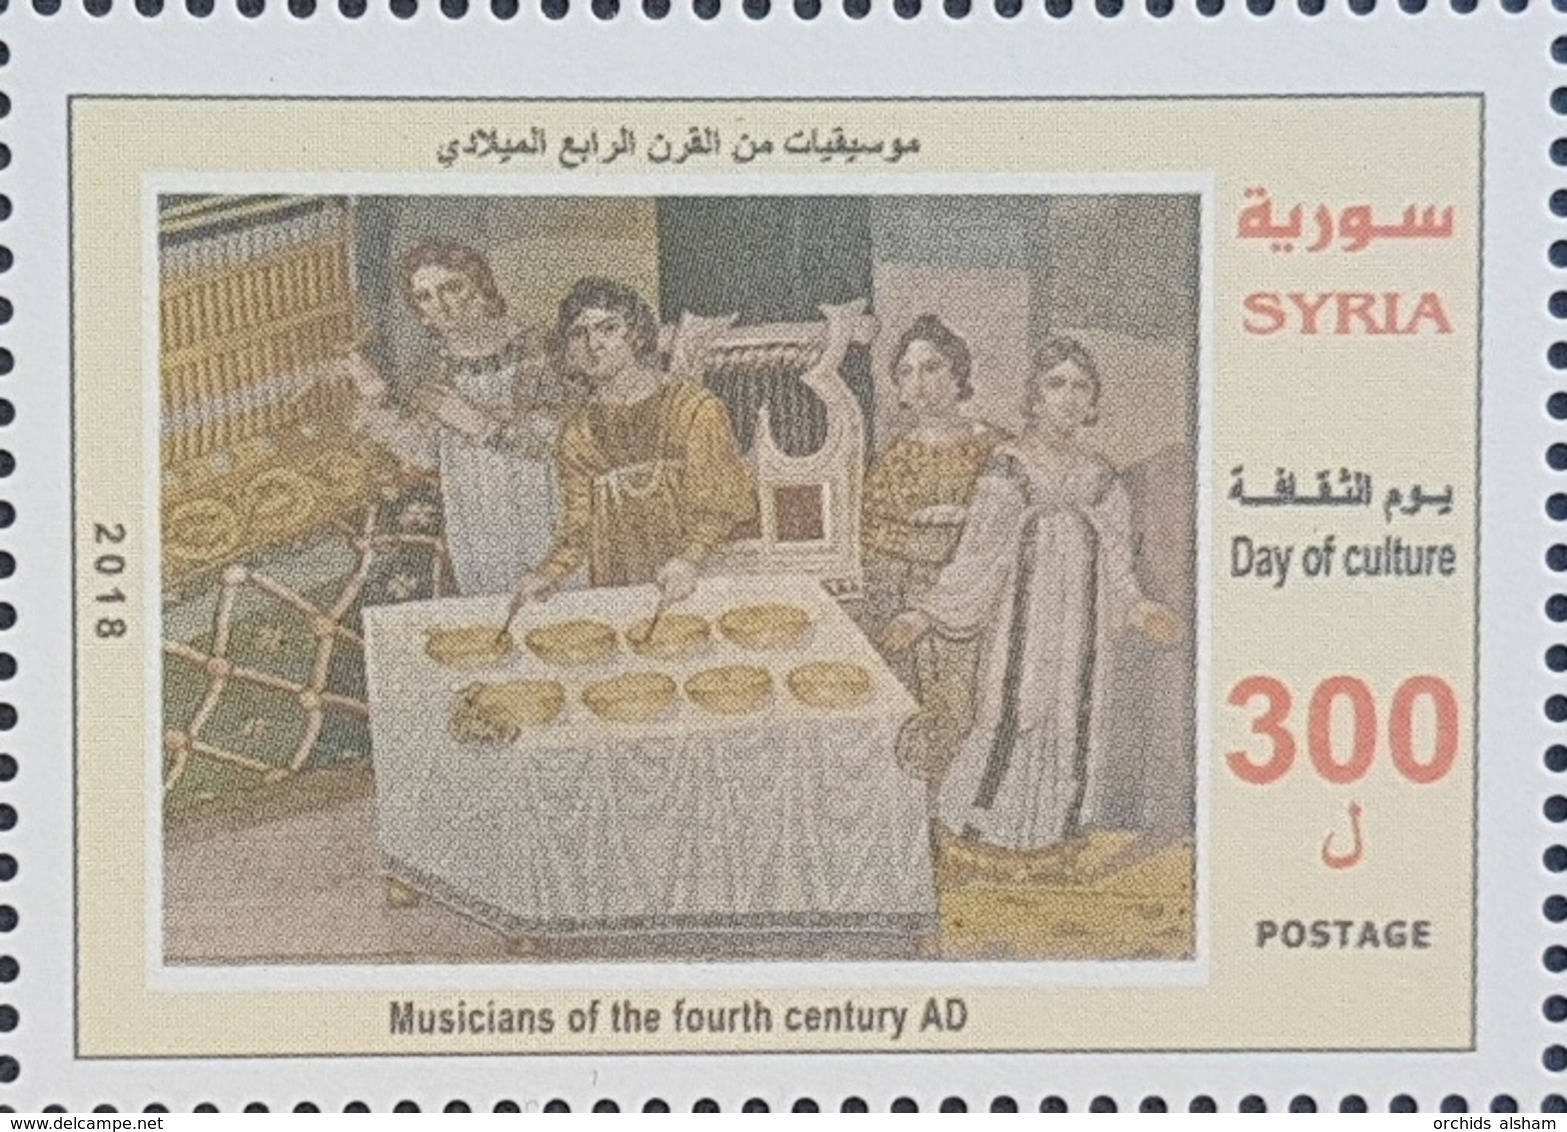 SYRIA NEW 2019 MNH Stamp - Day Of Culture, Music, Musicians Of The 4th Century - Syrië